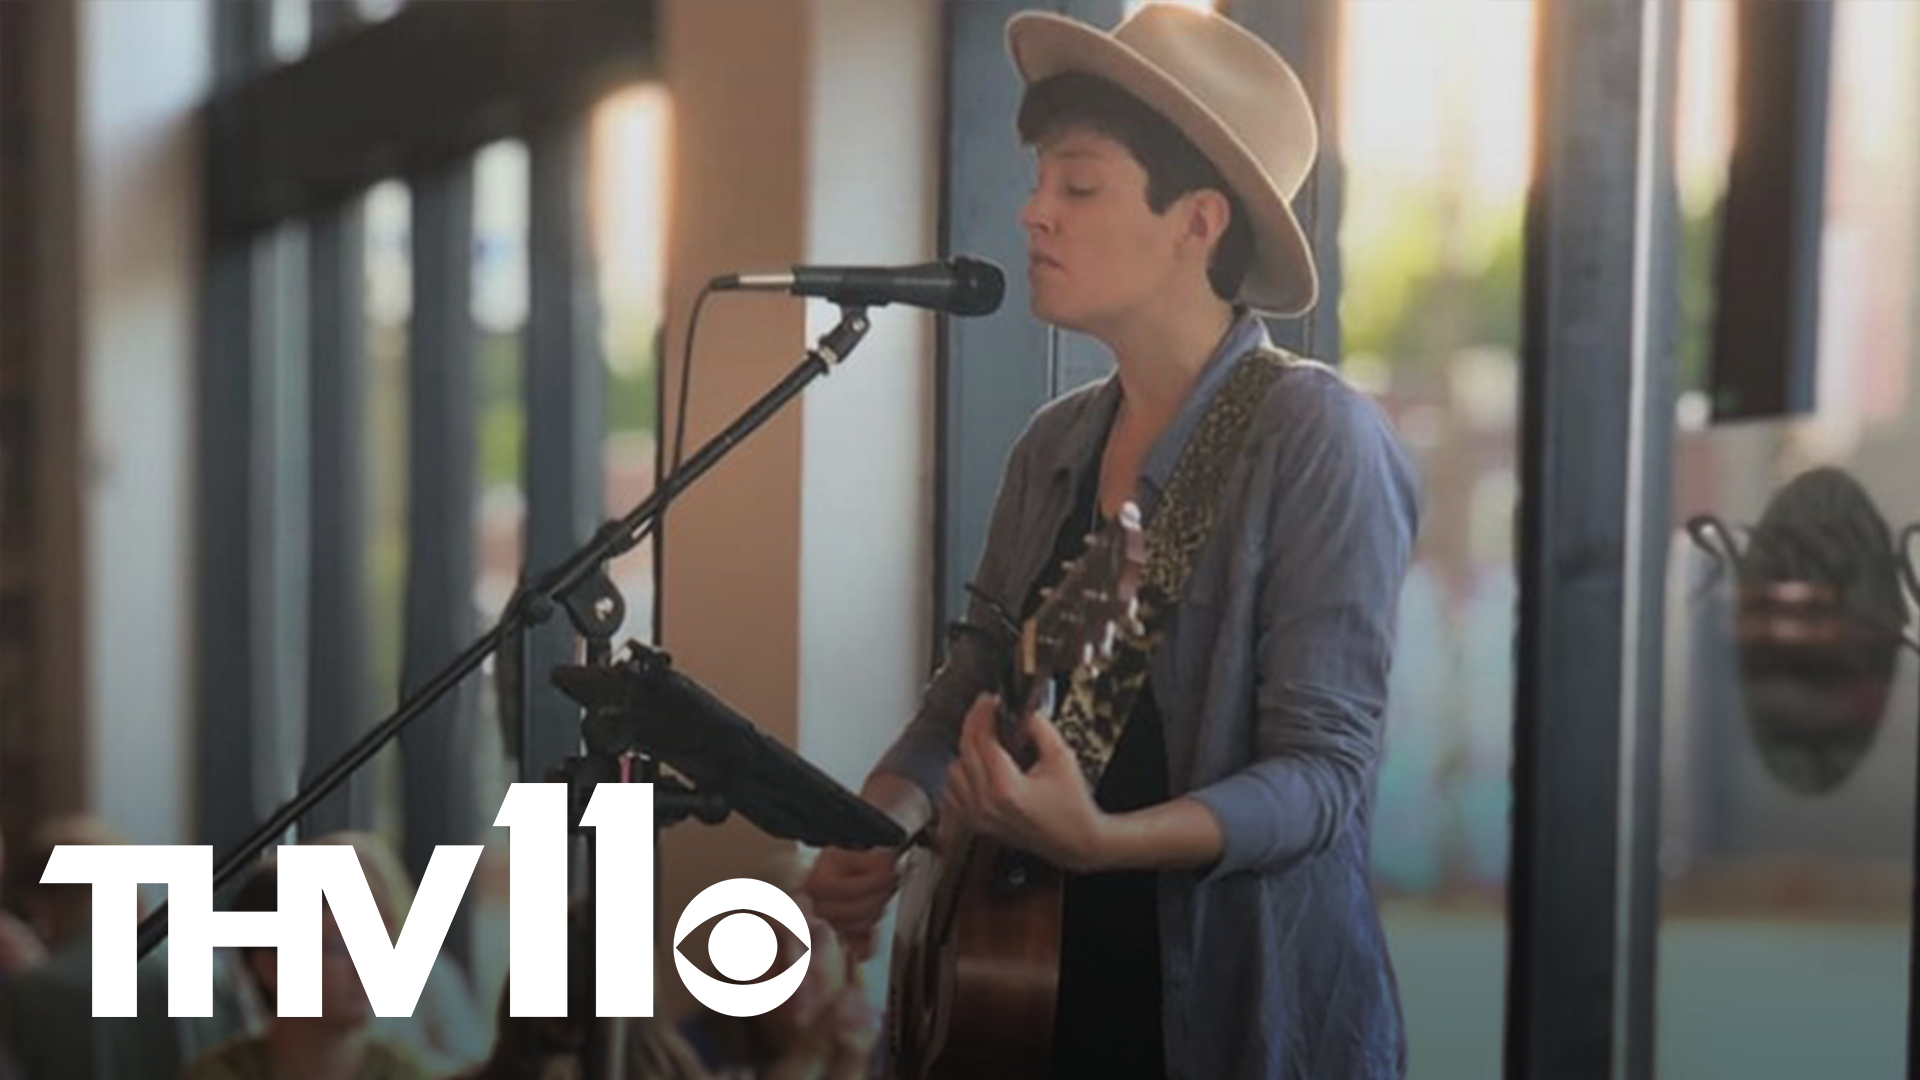 An Arkansas musician has an important message. Townsend performs across the state, and she's using her platform to remind us all we're not alone.